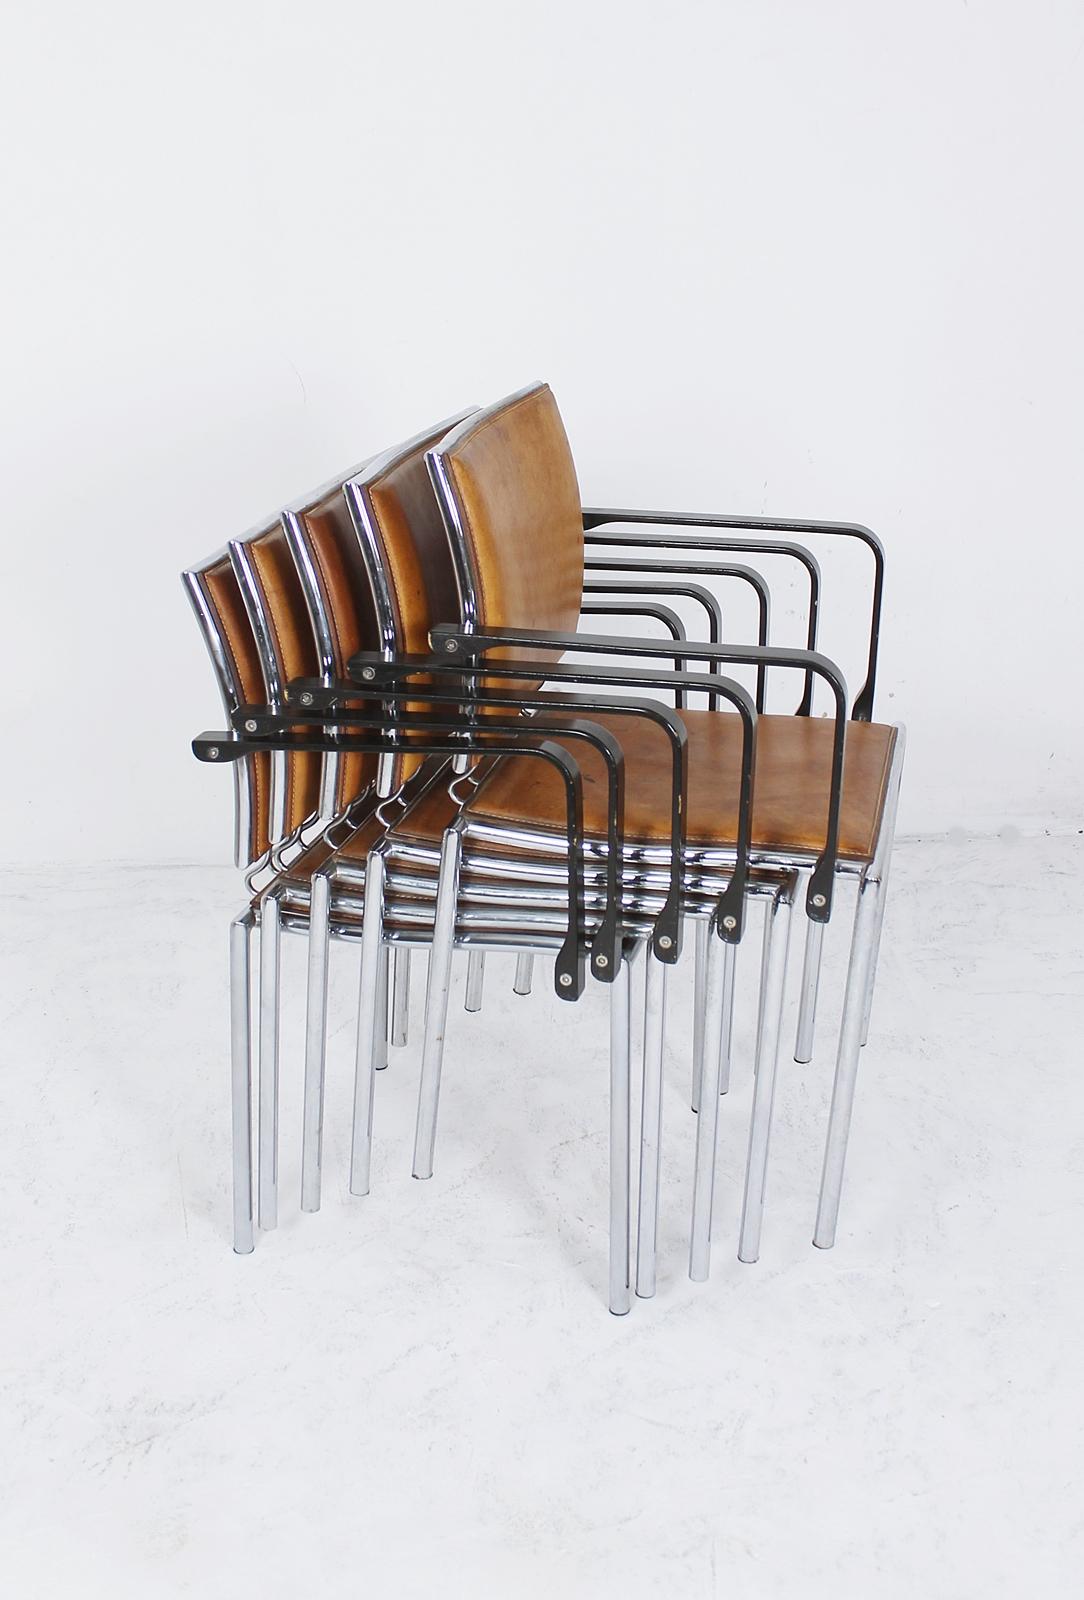 Swiss Armchair Quadro Steel by Bruno Rey & Charles Polin for Dietiker, 1990s For Sale 7